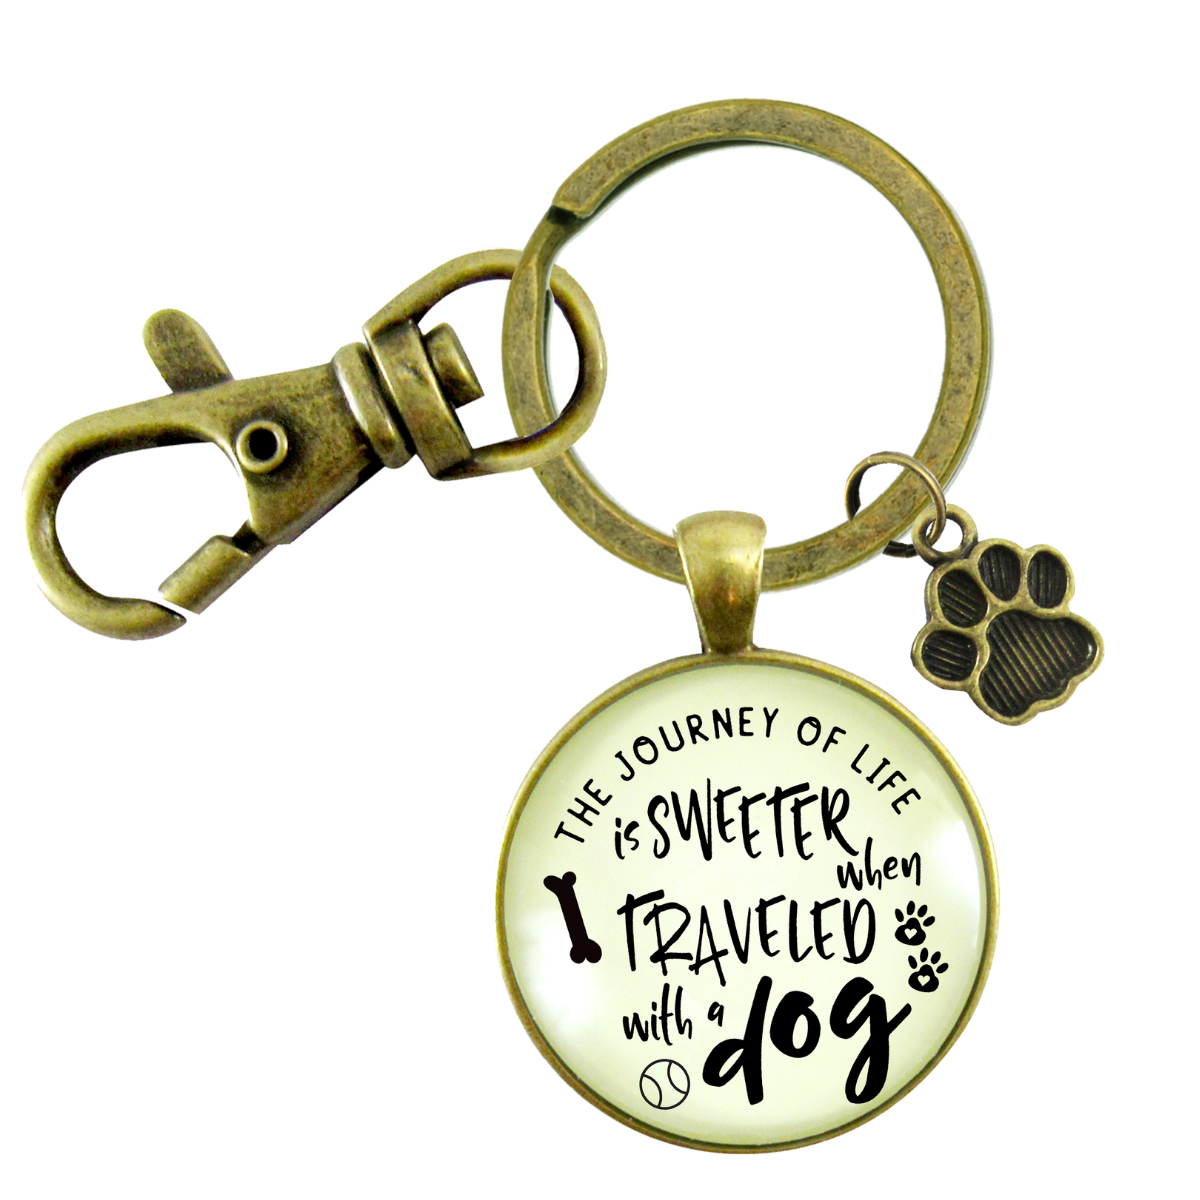 Dog Keychain Life Is Sweeter BFF Friendship Pet Jewelry For Men Rustic Dad Paw - Gutsy Goodness Handmade Jewelry;Dog Keychain Life Is Sweeter Bff Friendship Pet Jewelry For Men Rustic Dad Paw - Gutsy Goodness Handmade Jewelry Gifts